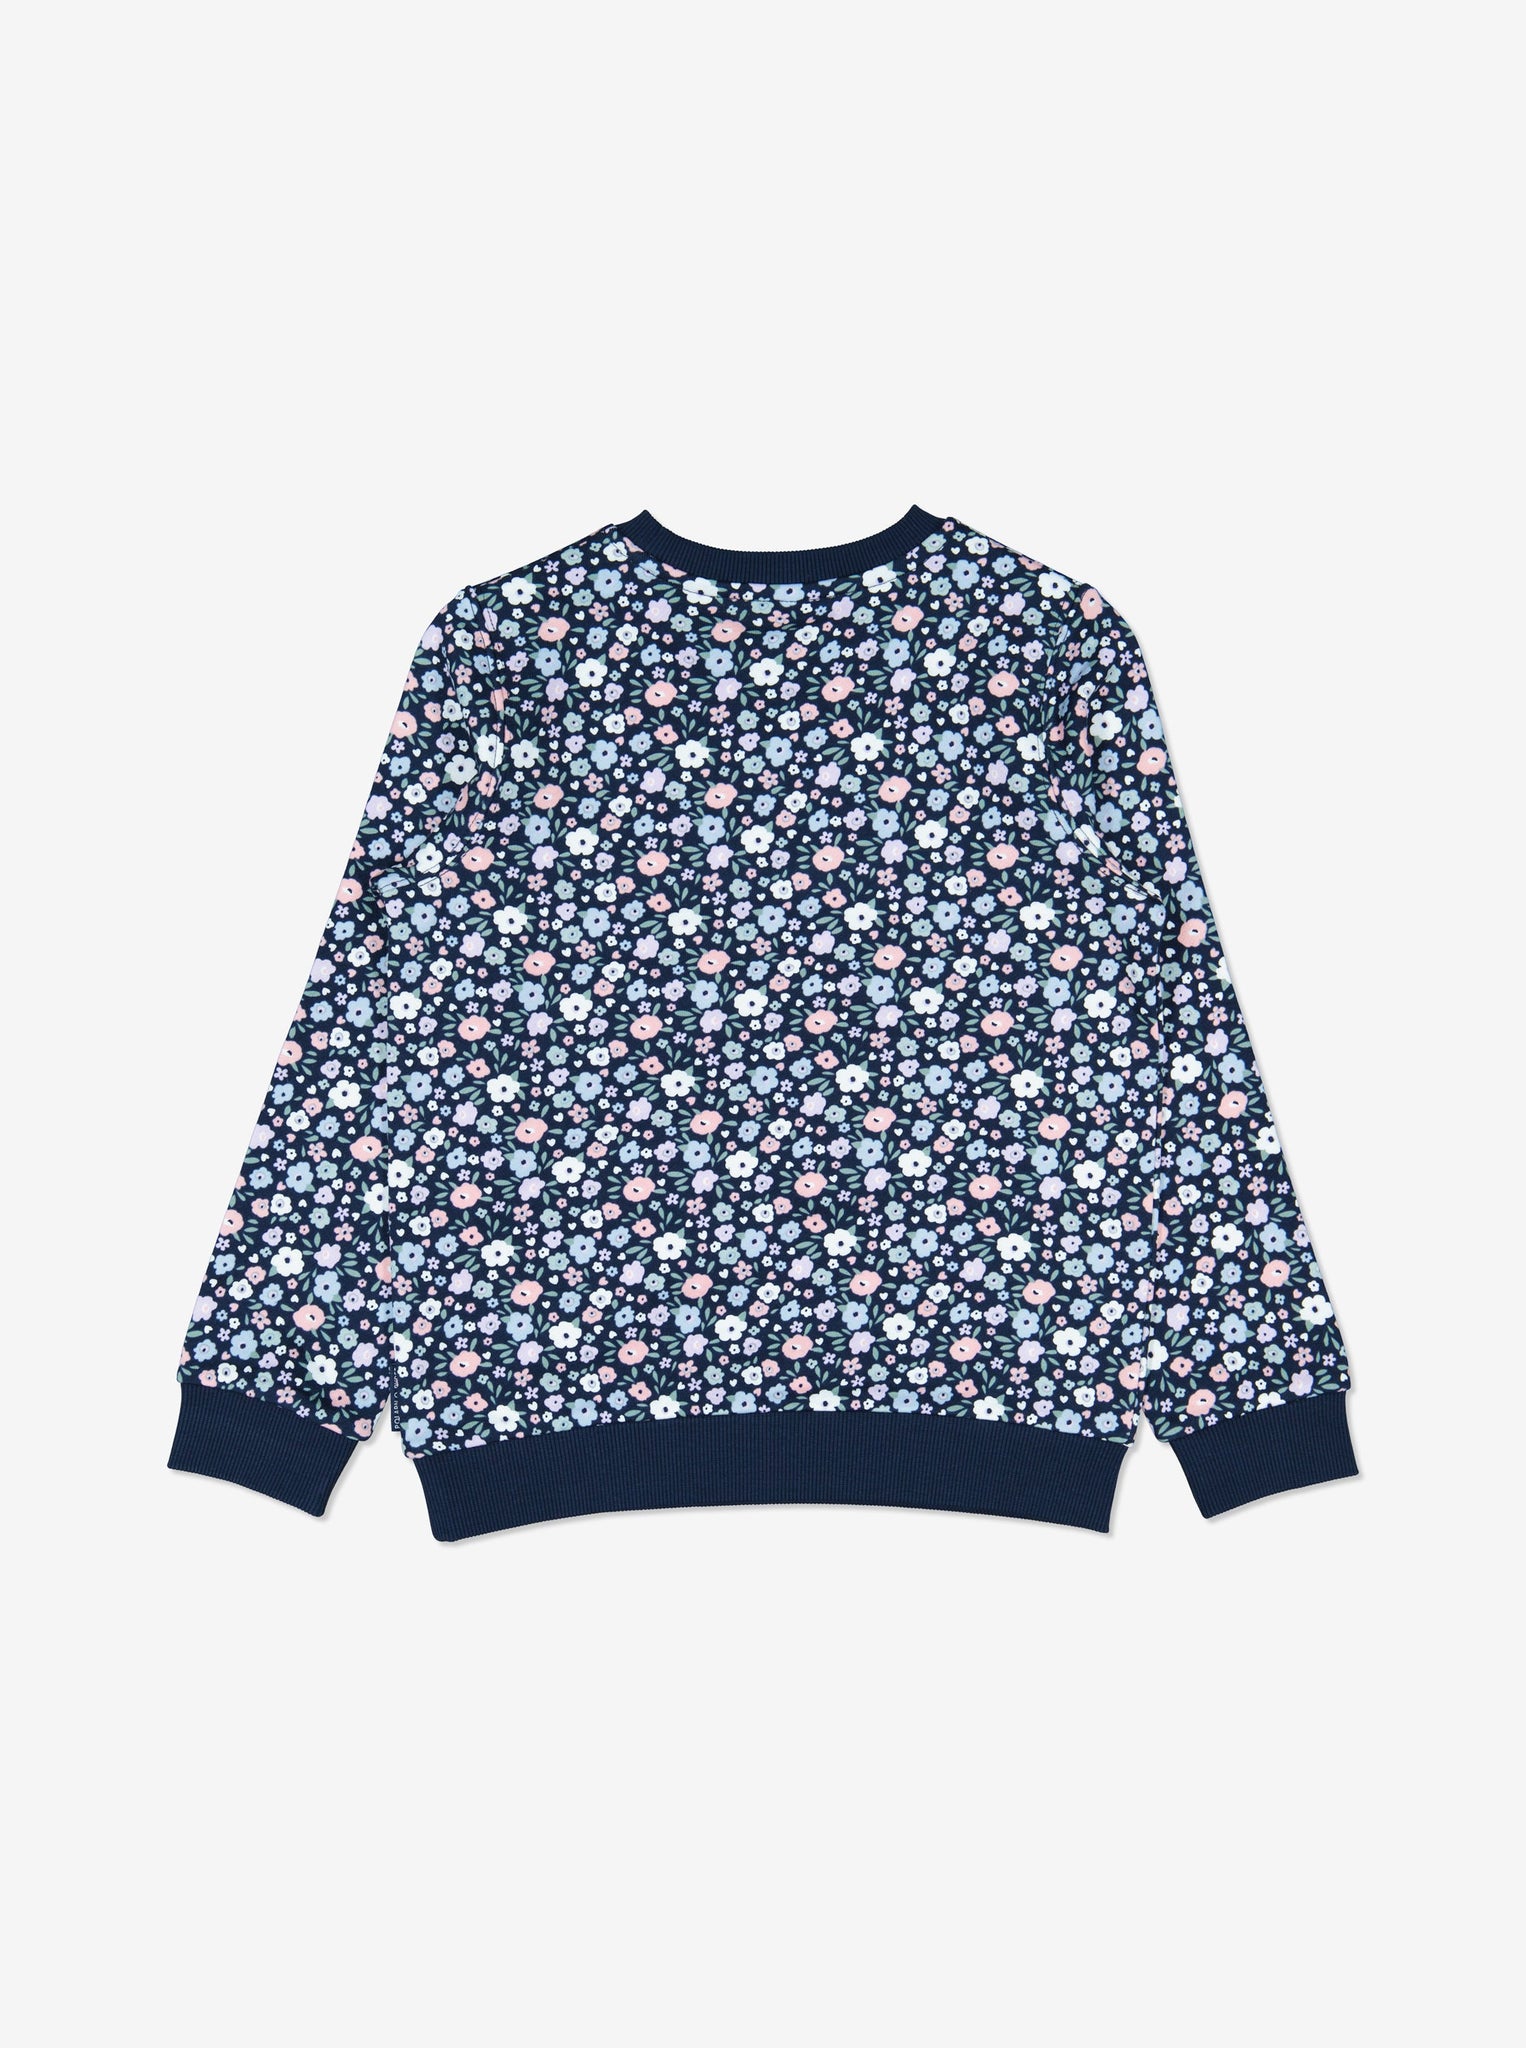  Floral Print Kids Sweatshirt from Polarn O. Pyret Kidswear. Made using sustainable materials.